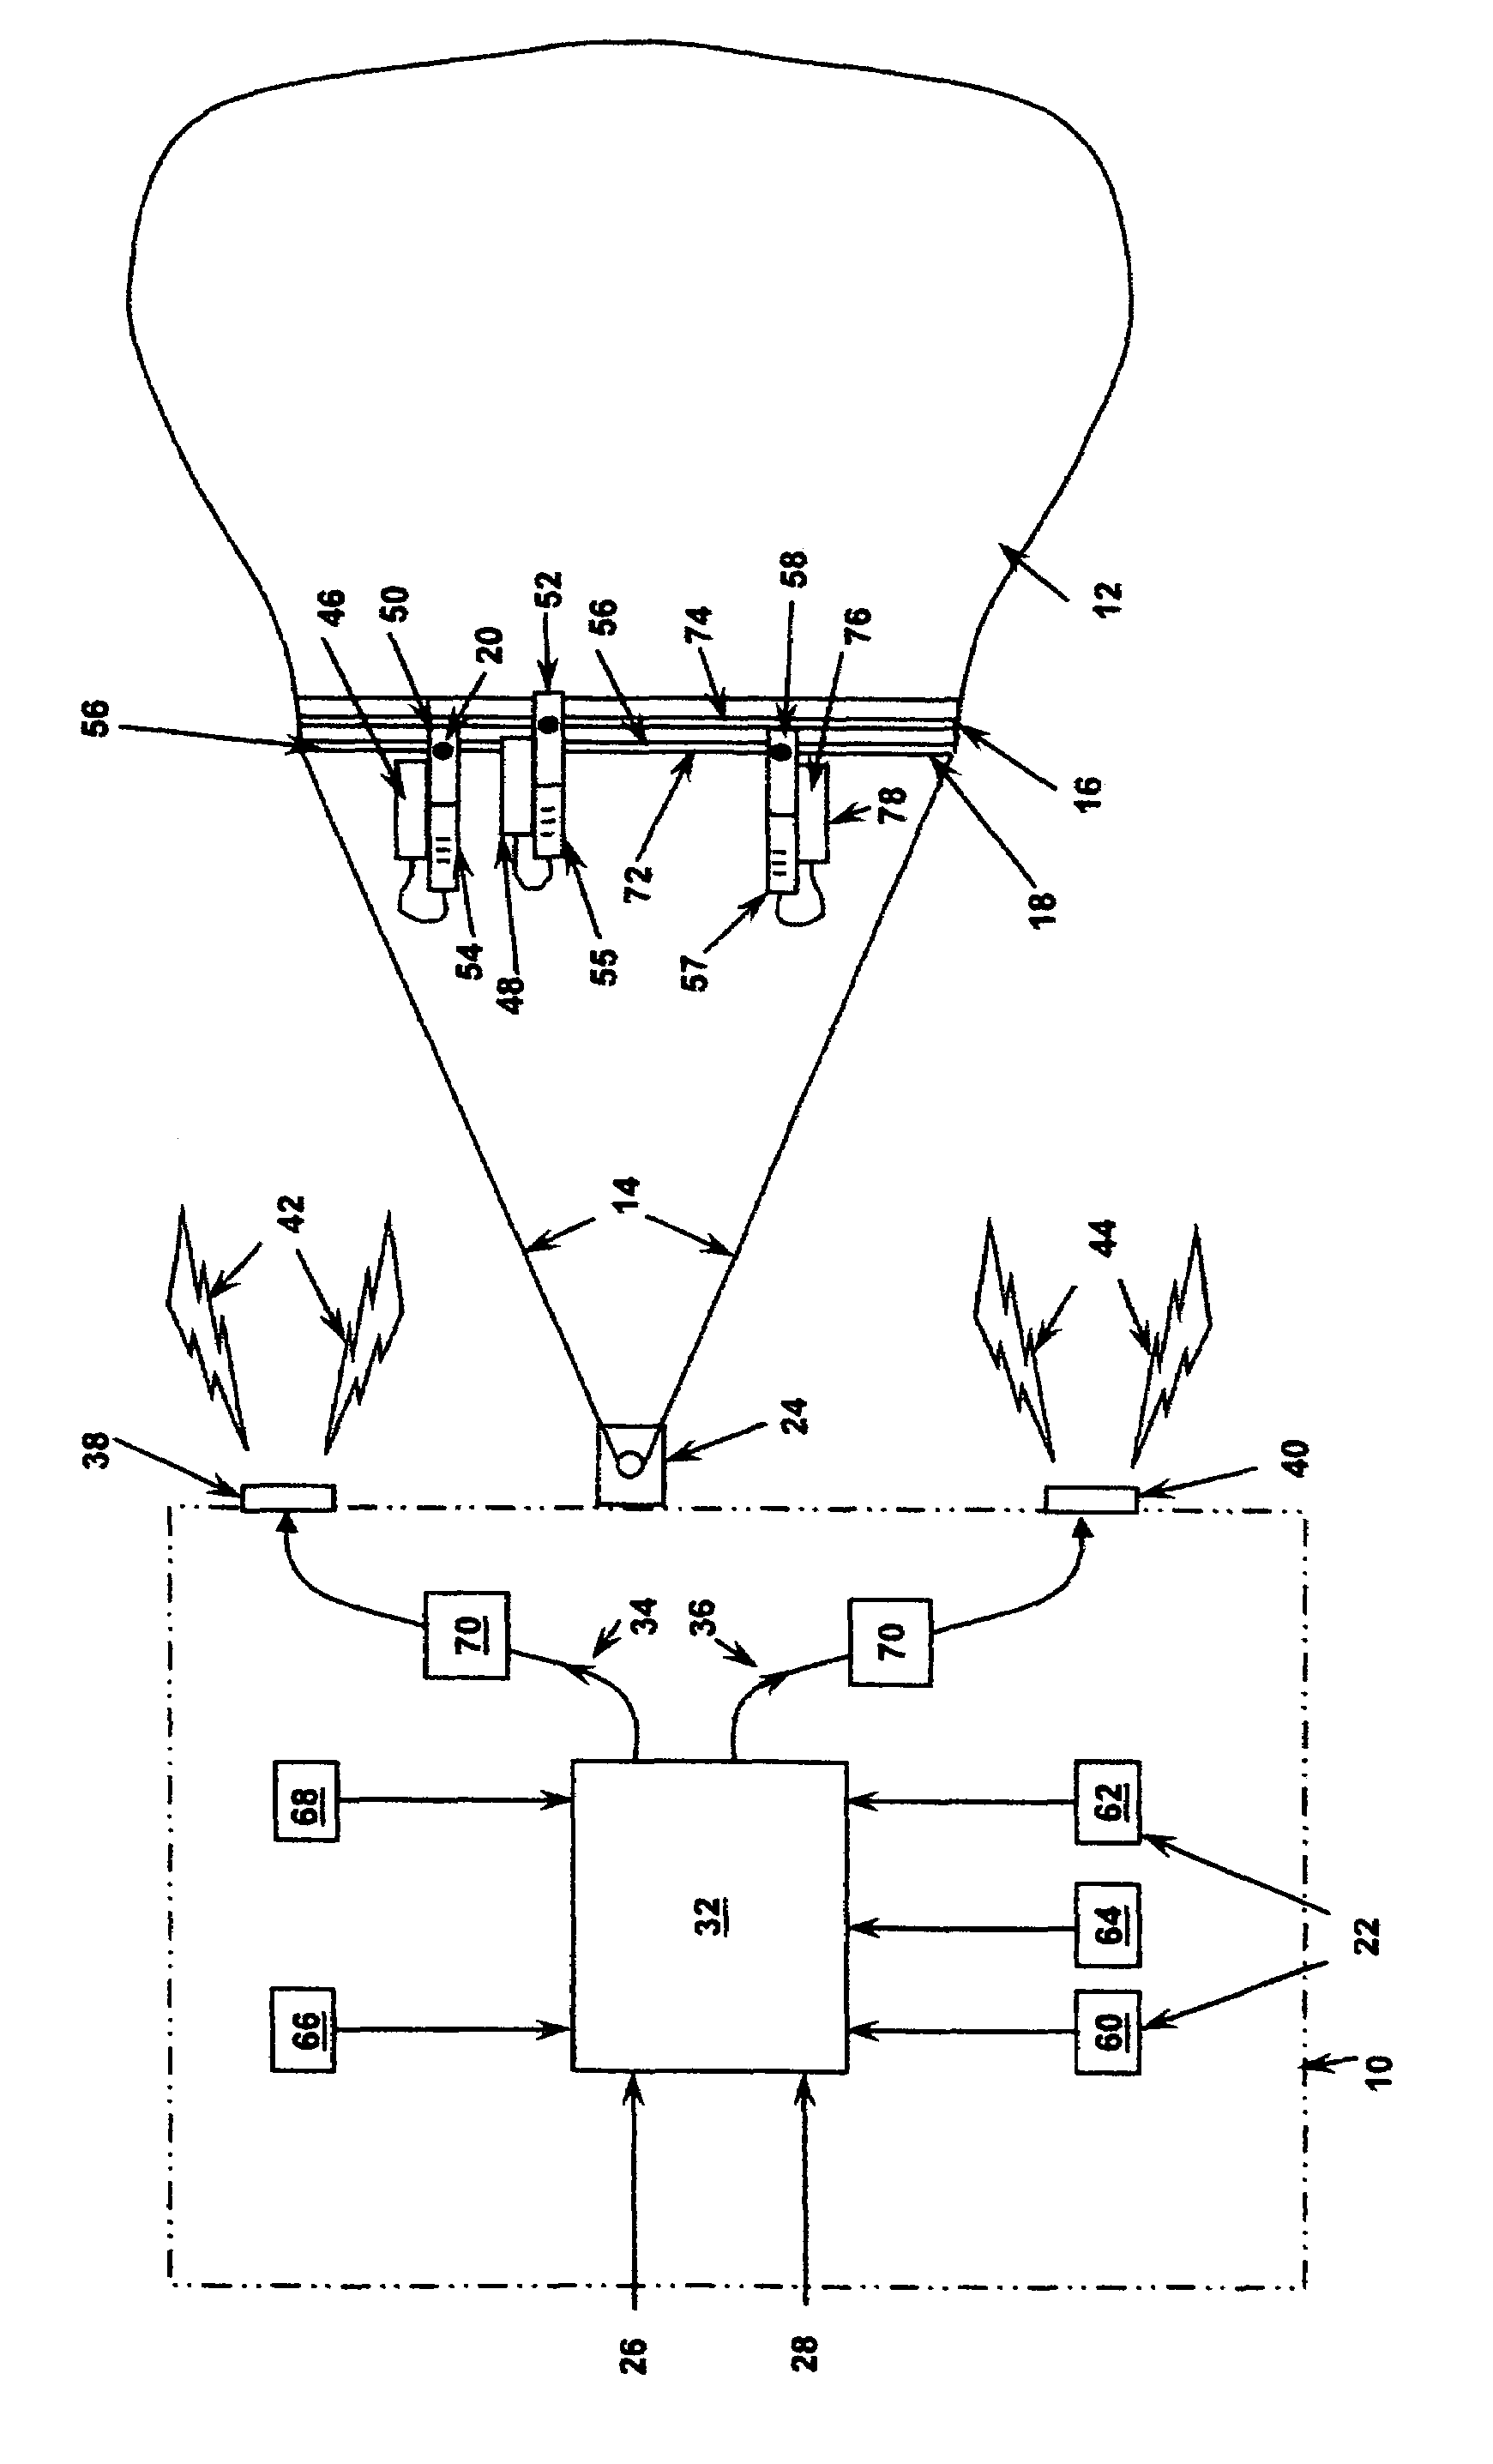 Method and apparatus for parachute reefing control